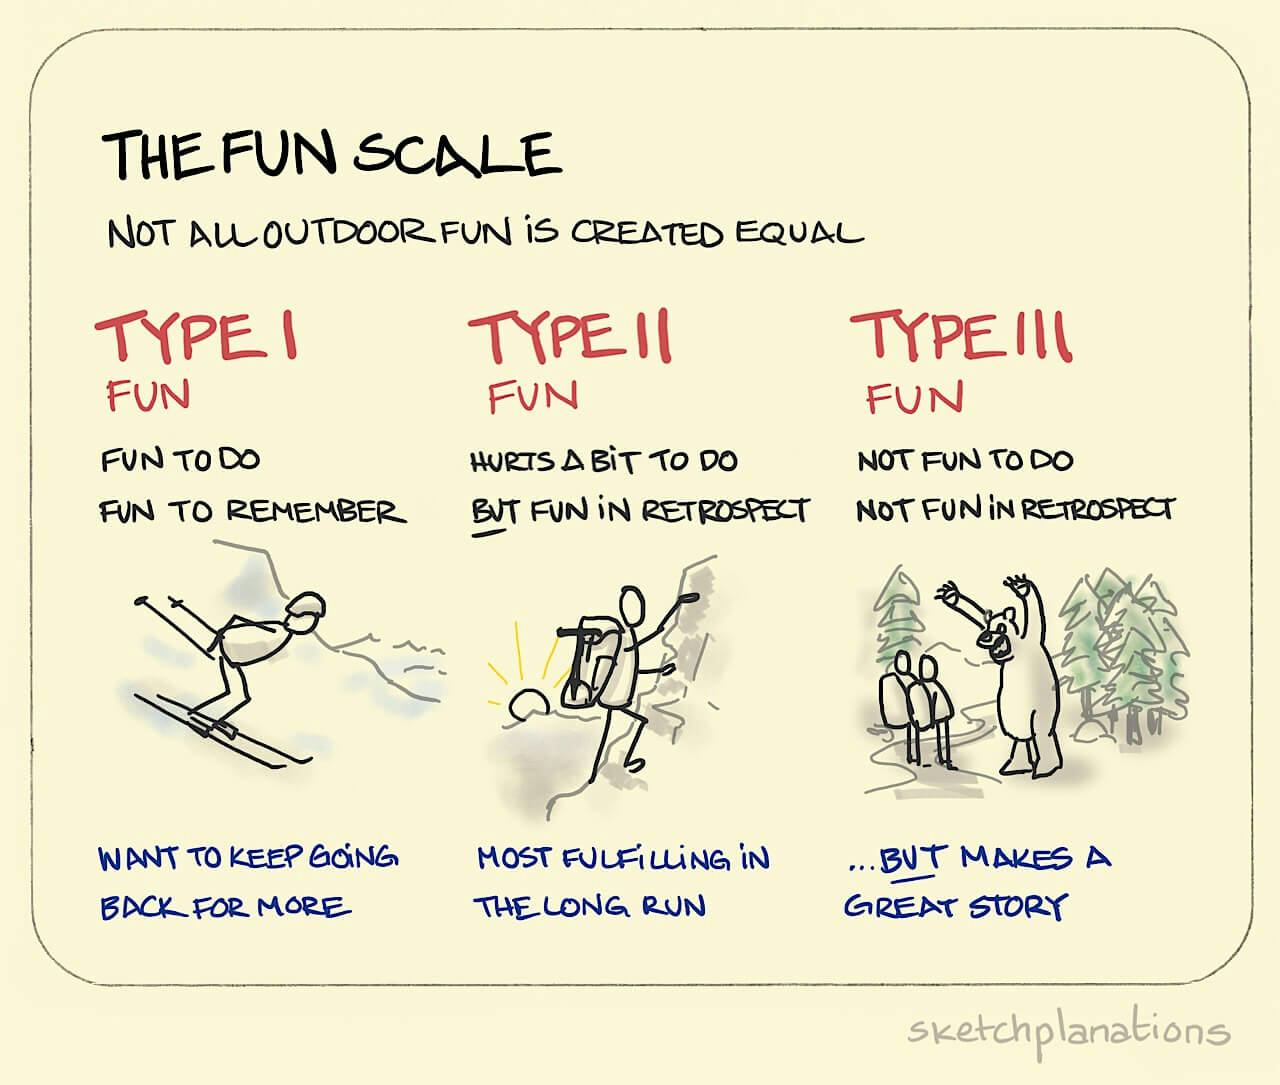 The fun scale: Type 1 fun a skier loving their descent, Type 2 fun a climber working hard up a mountain, and Type 3 fun that story of surprising the bear